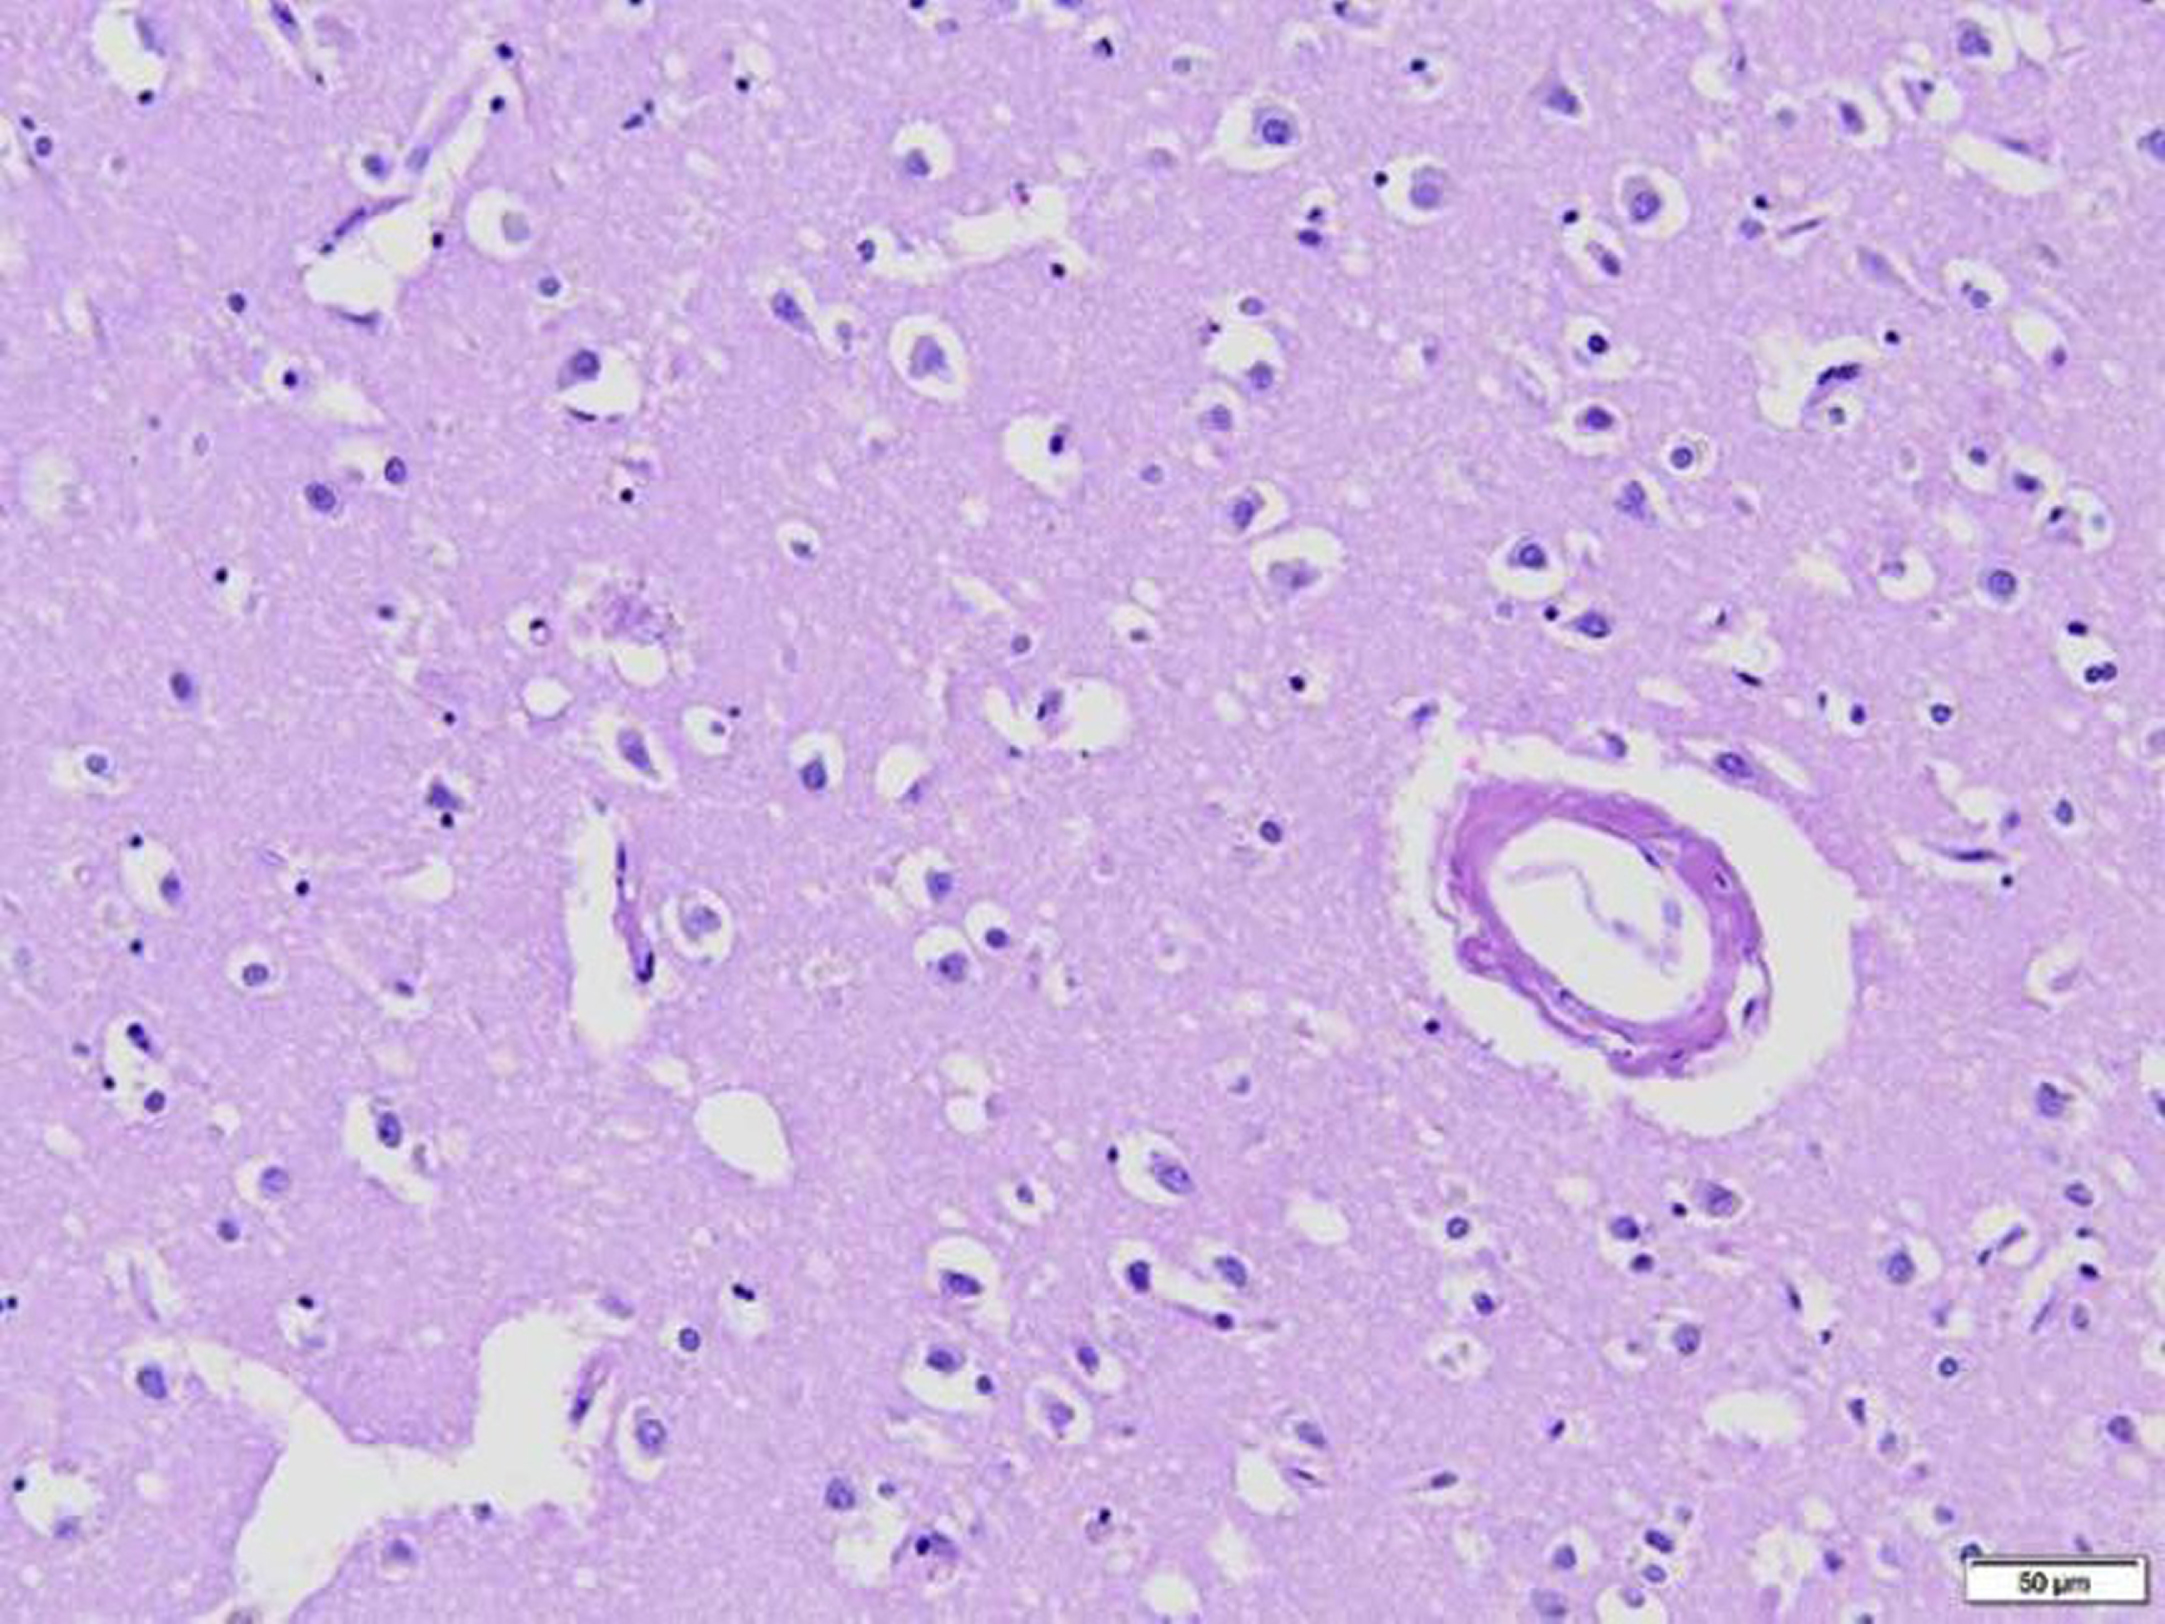 Plaque and blood vessel with amyloid deposition. Hematoxylin and Eosin, 200x.